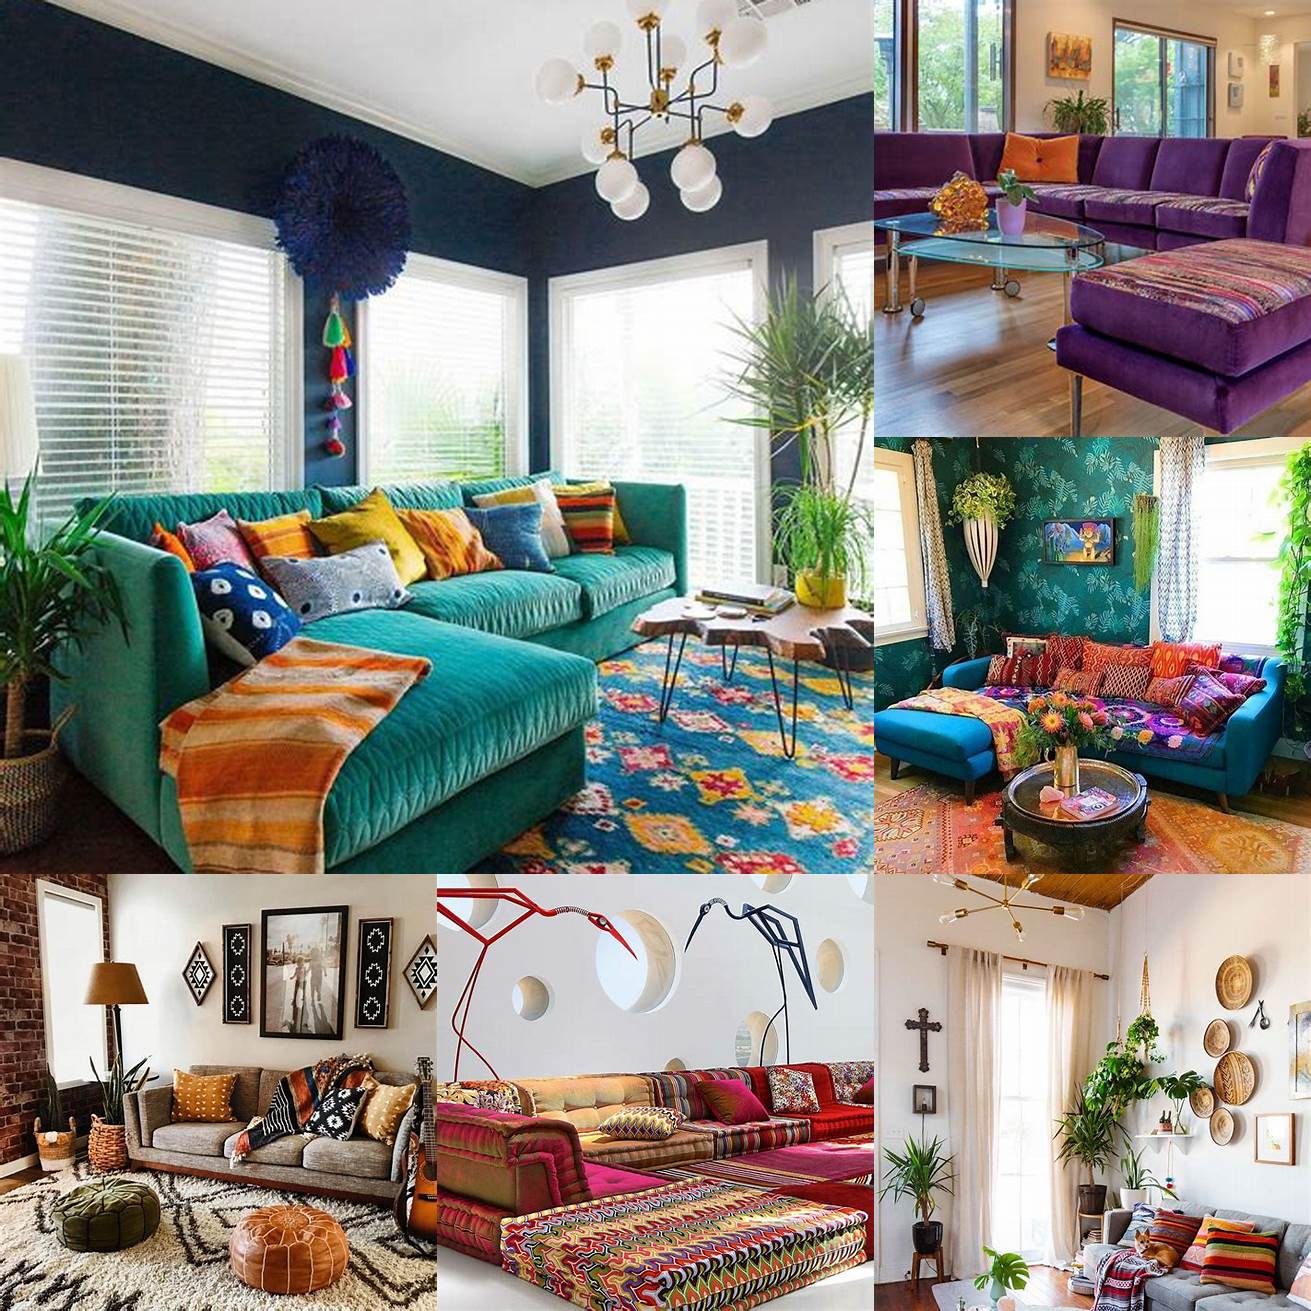 Image 4 A fun and colorful modern sectional sofa in a bohemian living room